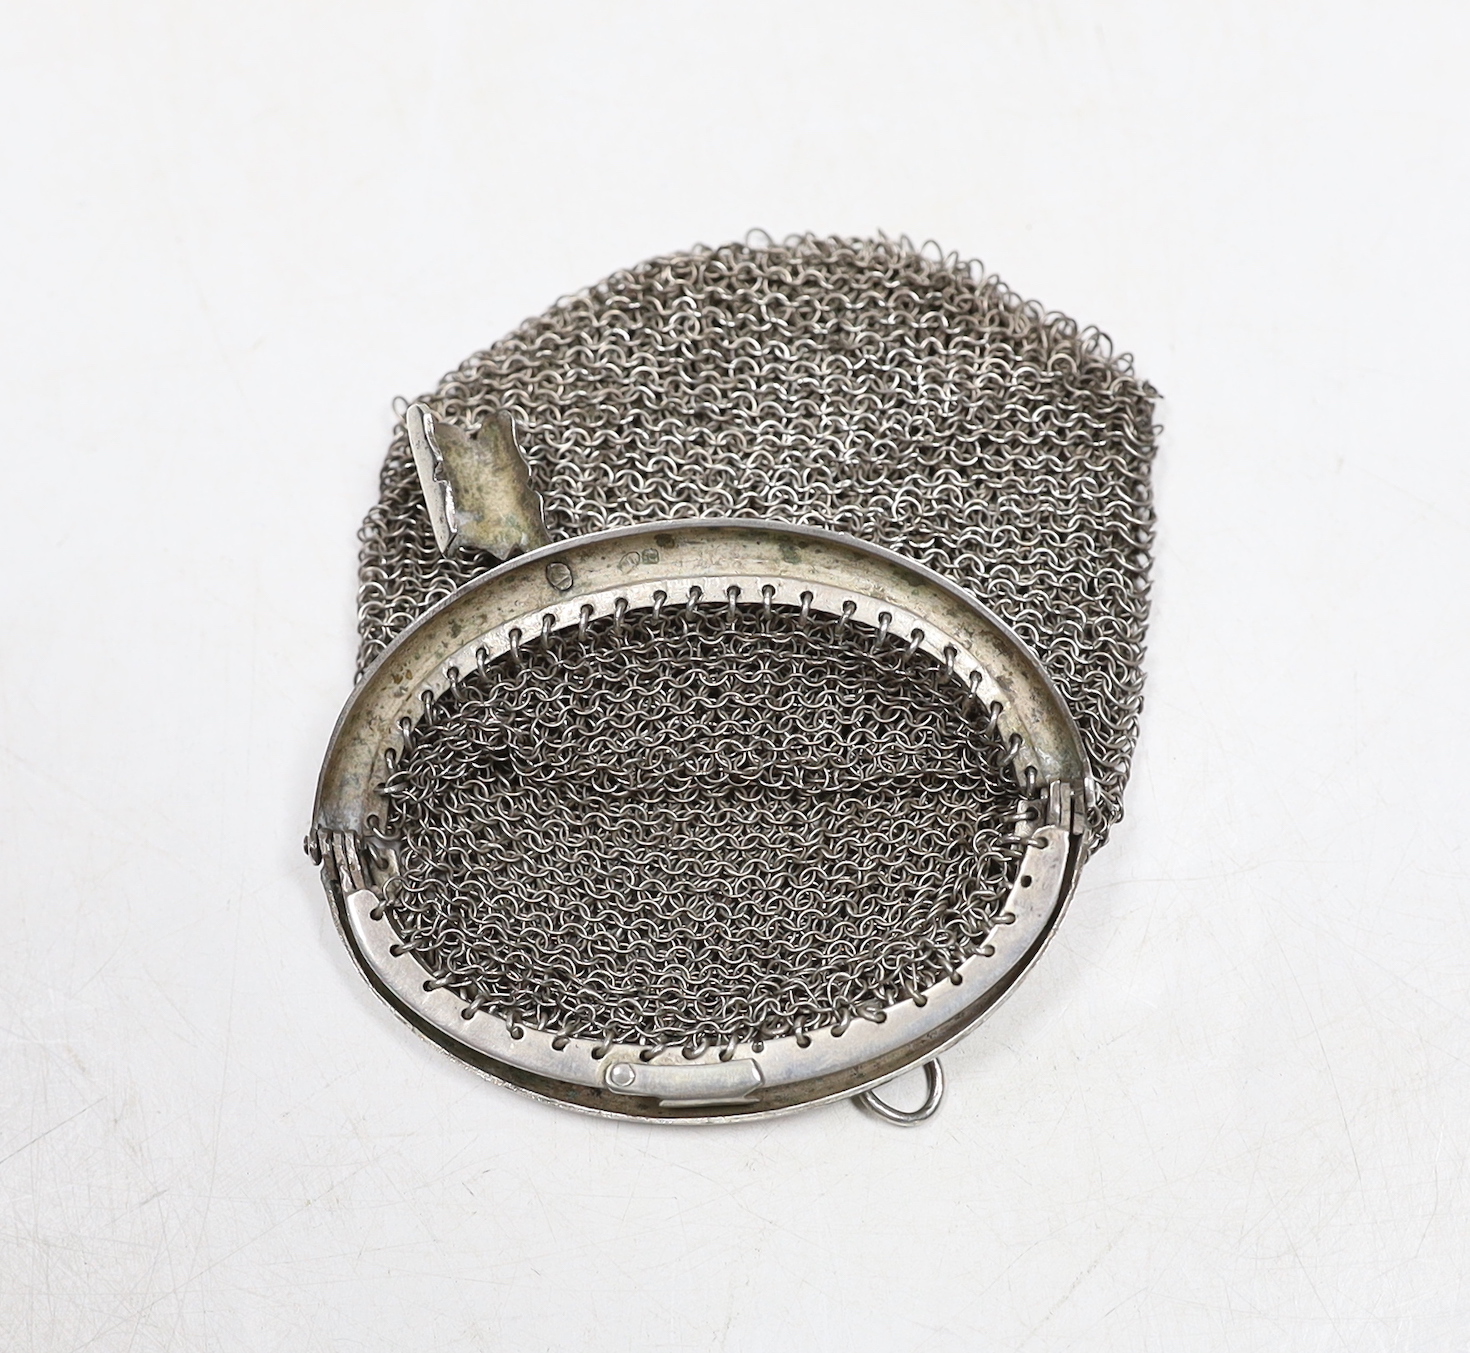 A miser's purse on suspension chain, together with a mesh evening purse.